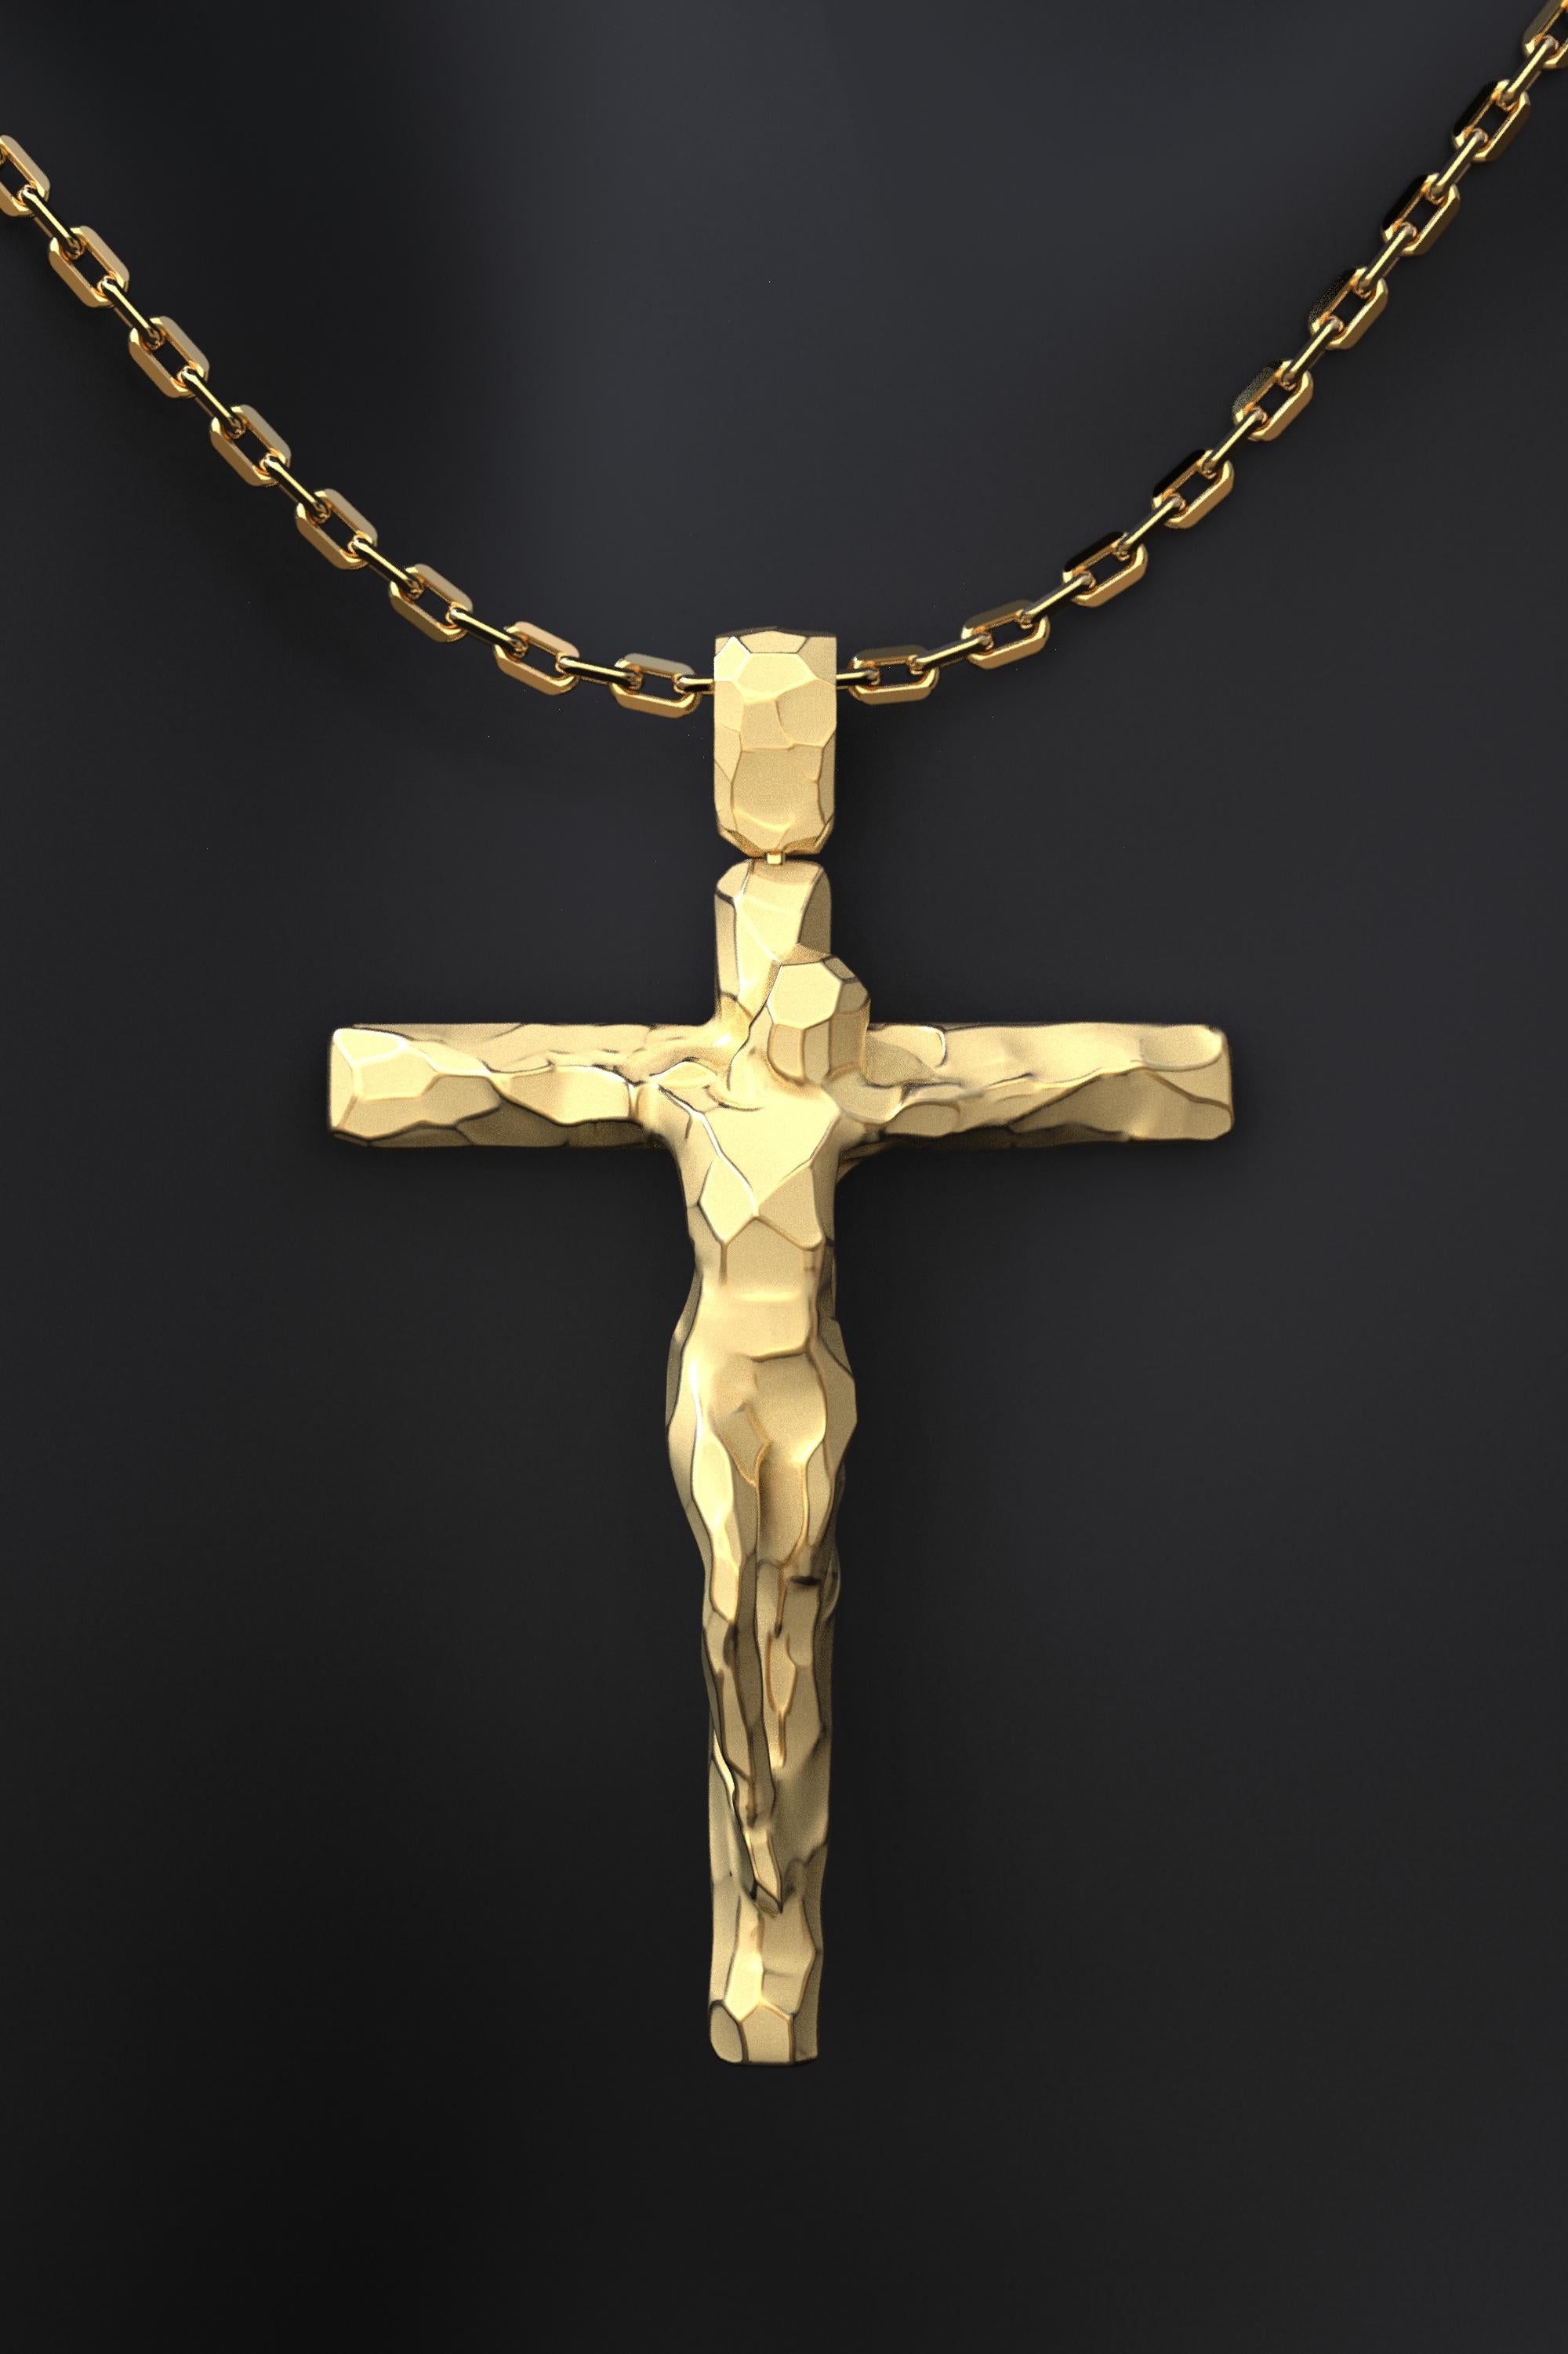 This made to order modern crucifix necklace is a beautiful and elegant way to express your faith. The crucifix is made of solid 14k gold and features a stylized design with a facetted surface. The cross is suspended from a sturdy Forzatina chain,